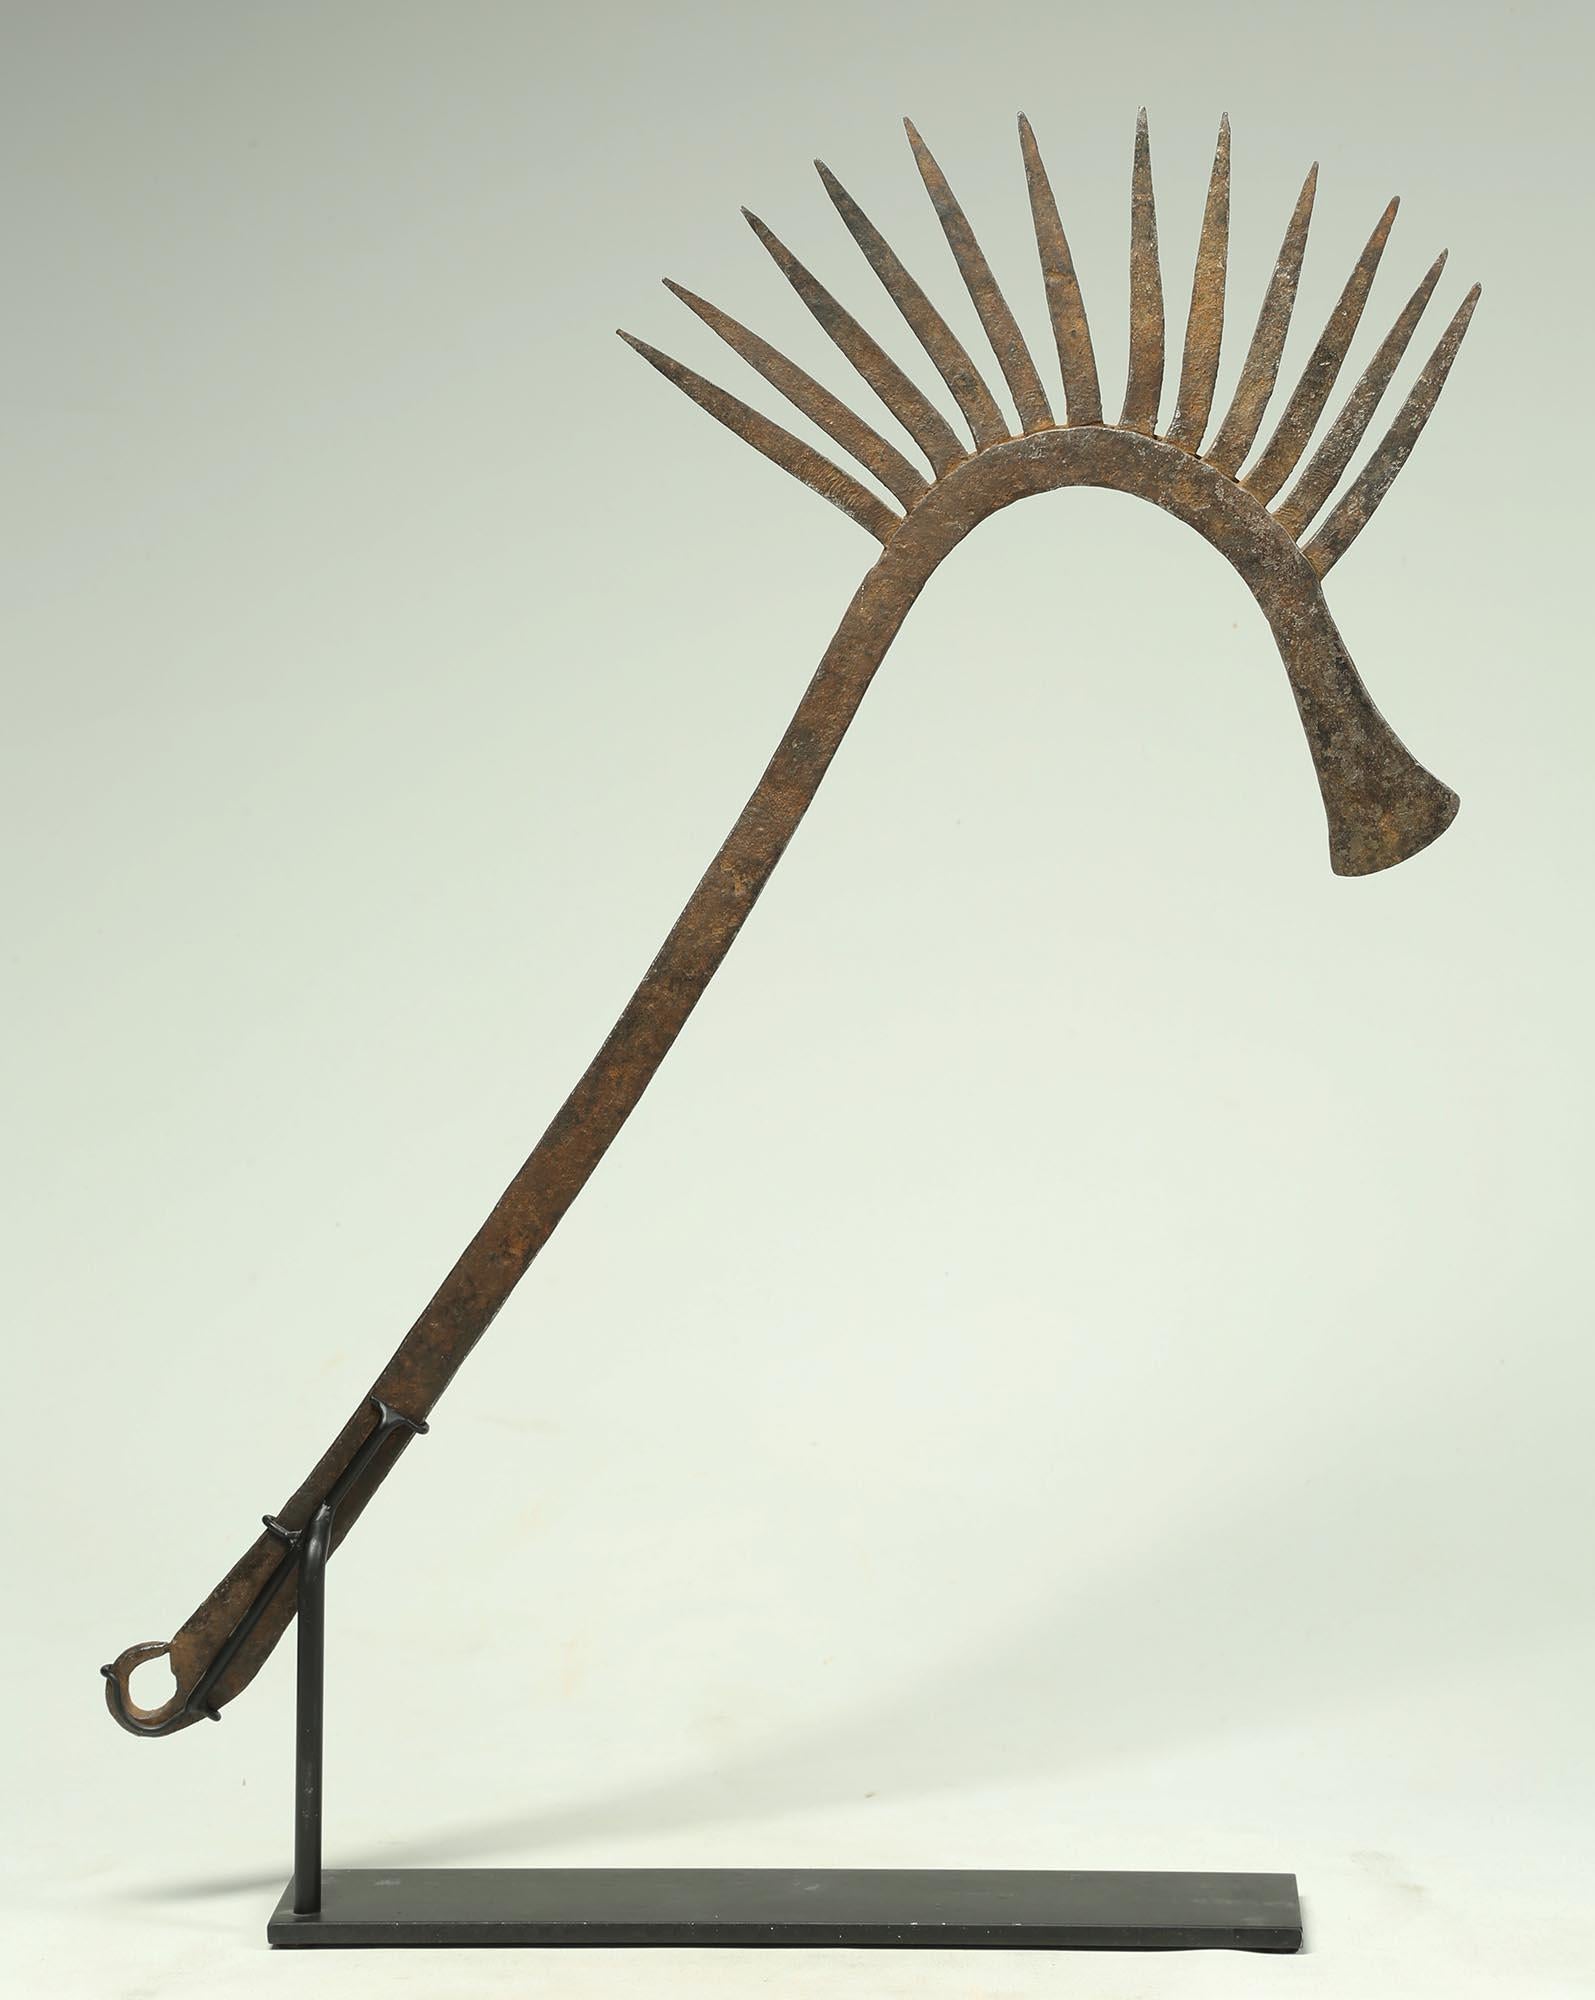 Hand-Crafted Kirdi Bird Iron Currency Staff Nigeria Early 20th Century West African Tribe Art For Sale